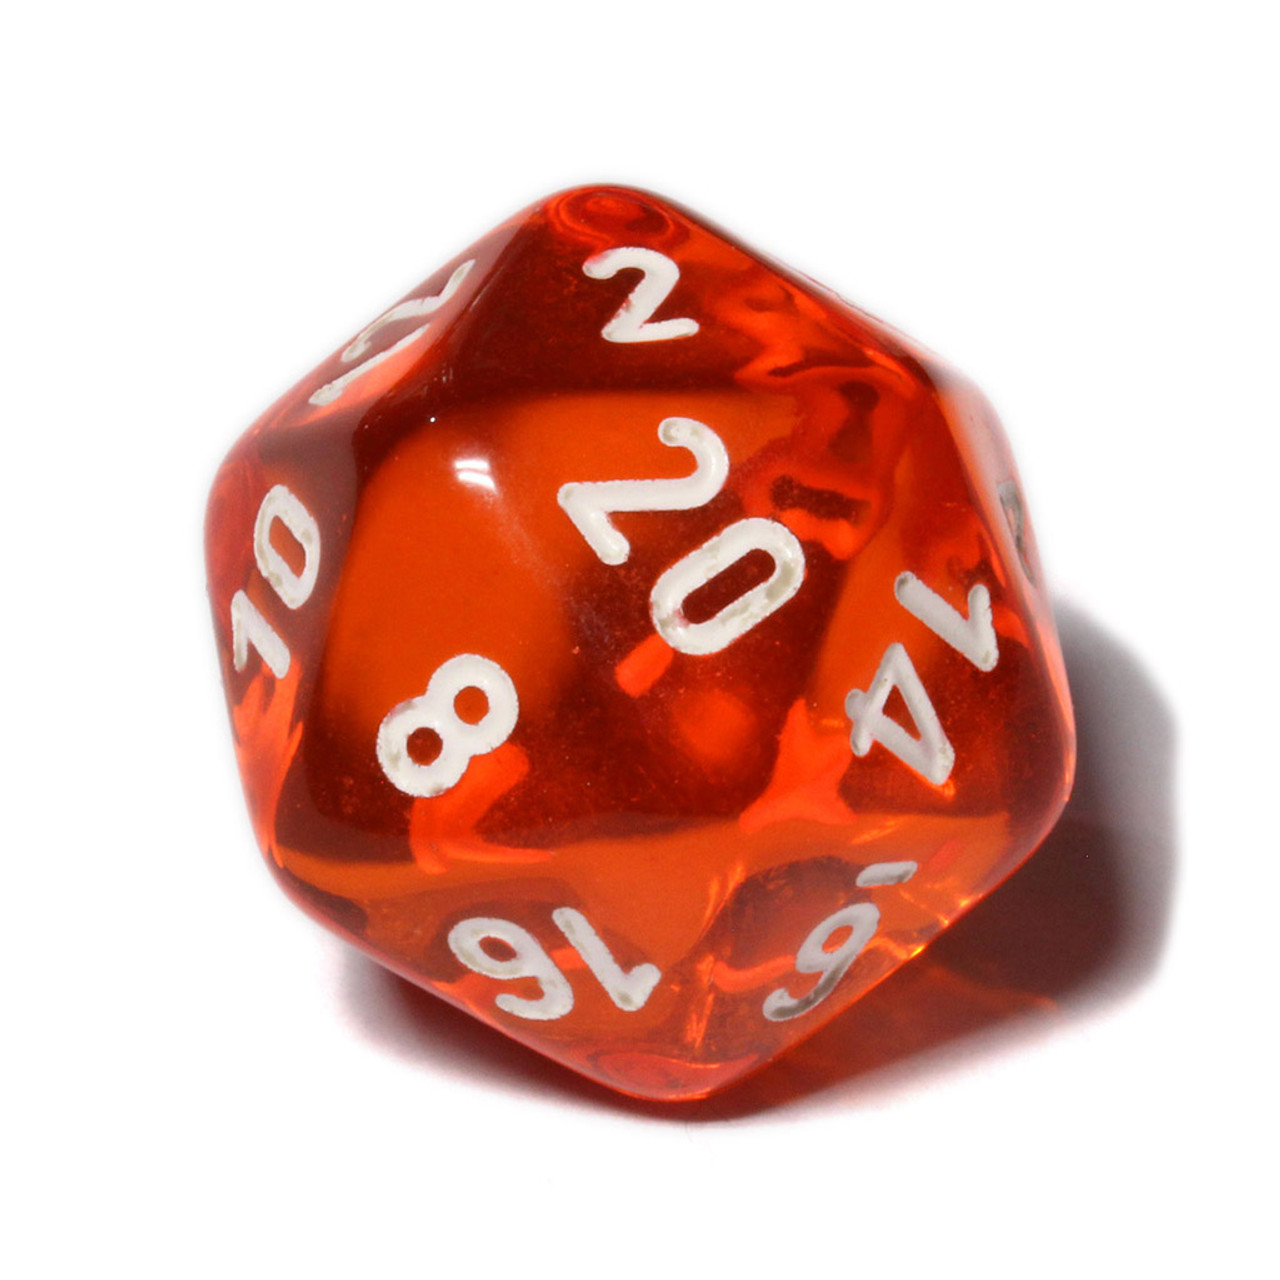 A red d20 with the 20 facing upwards